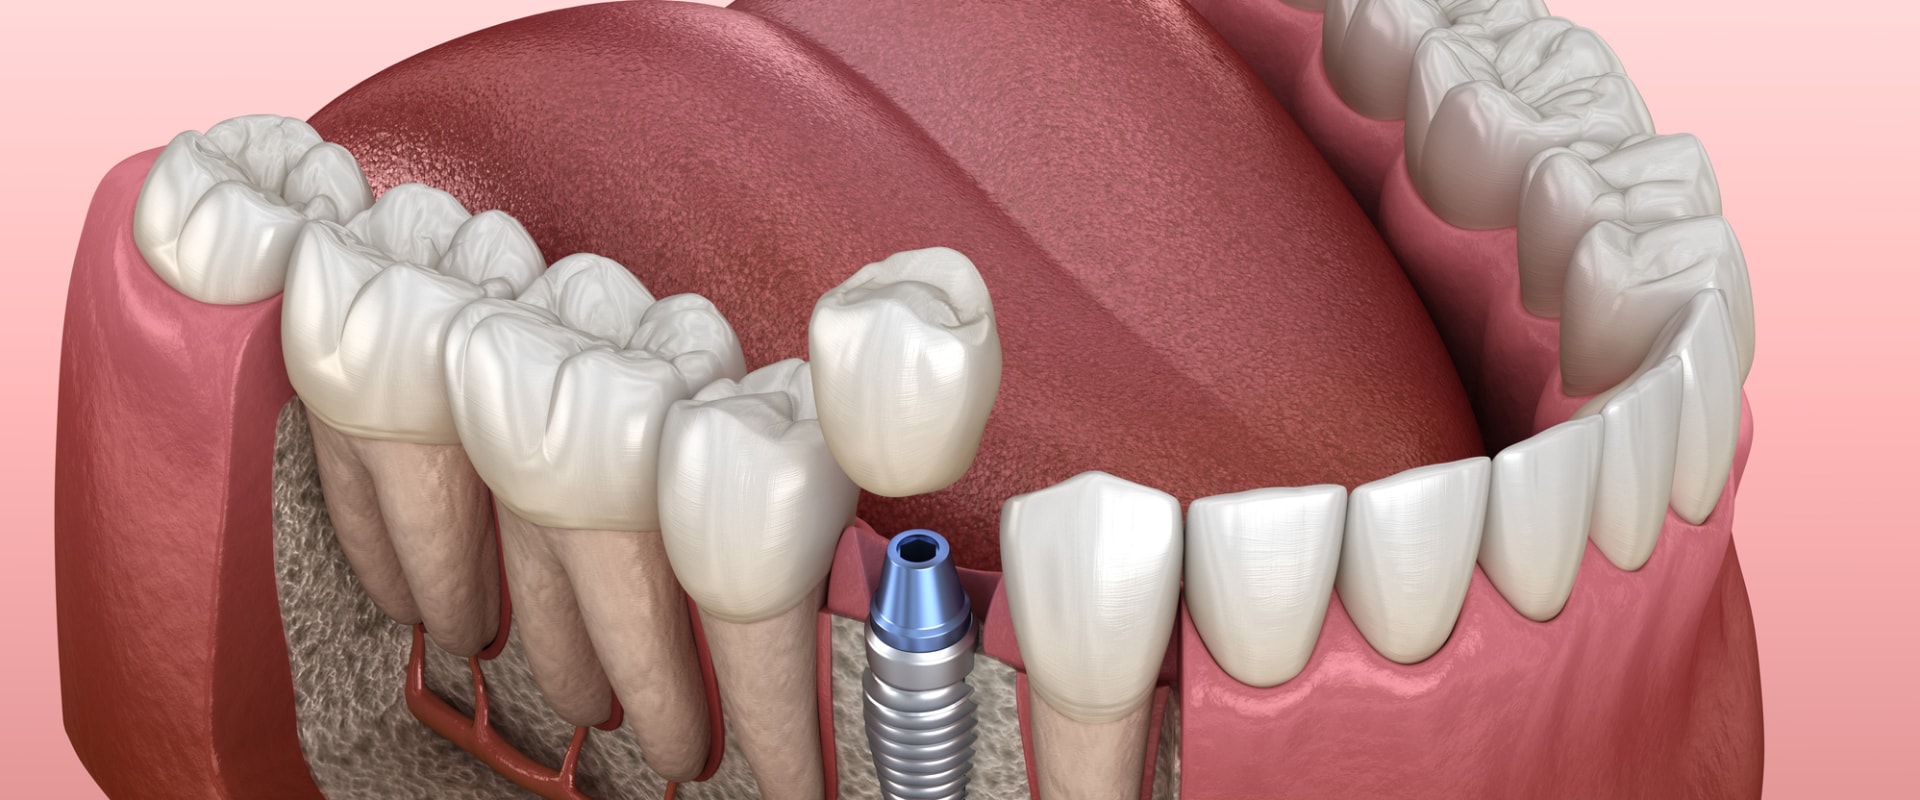 Can You Have Dental Implants with Low Bone Density? - A Comprehensive Guide